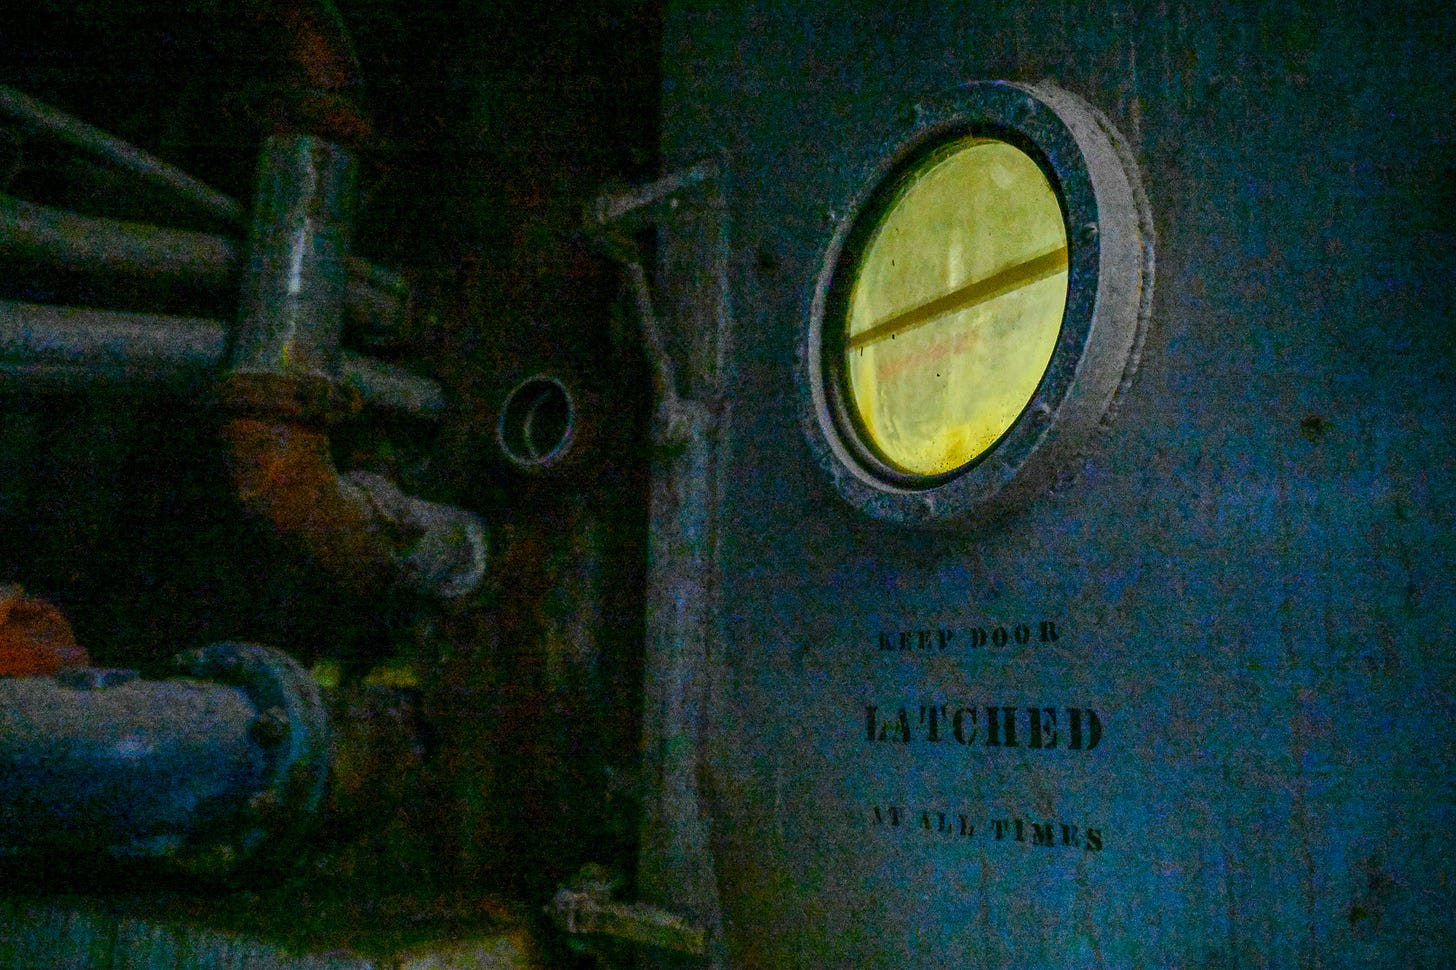 a dim image of a large steel door. the light source comes from the other side of the door visible through a round porthole. stenciled on the door are the words in all caps "keep door latched at all times"